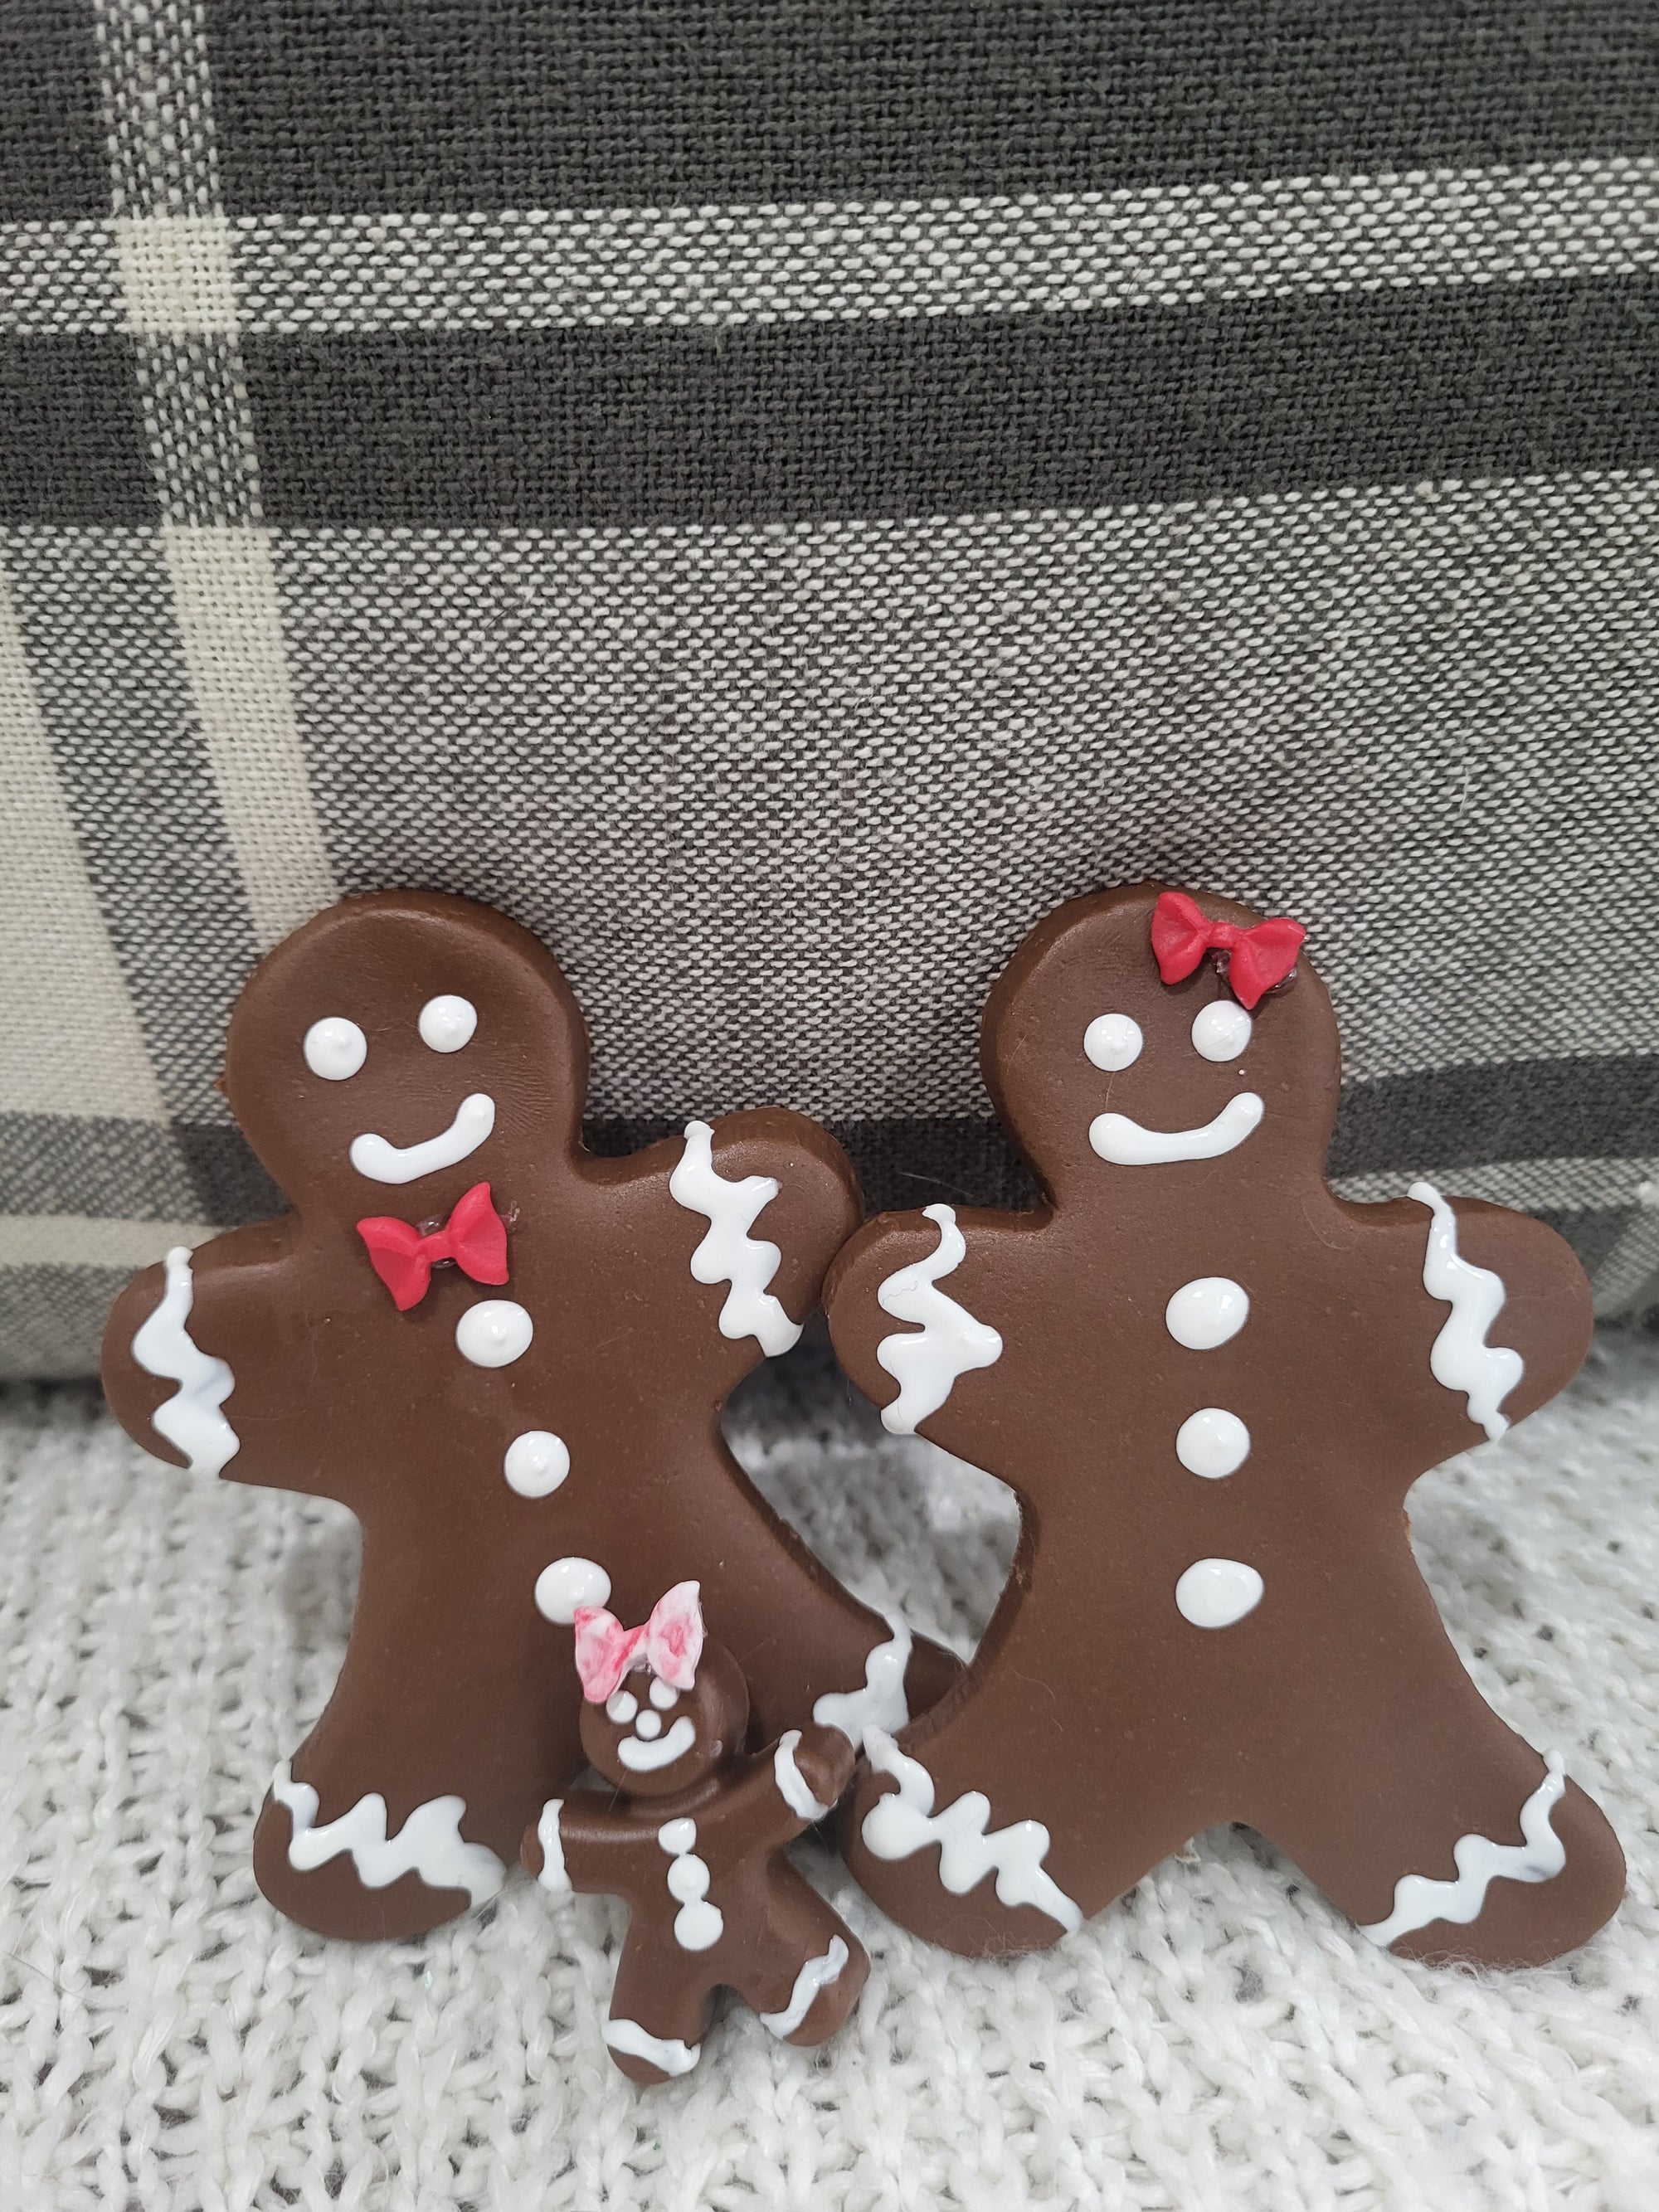 Pip Posh Design Faux Sweet Décor Gingerbread Cookie Red Bow Family Holiday Bakery Collection